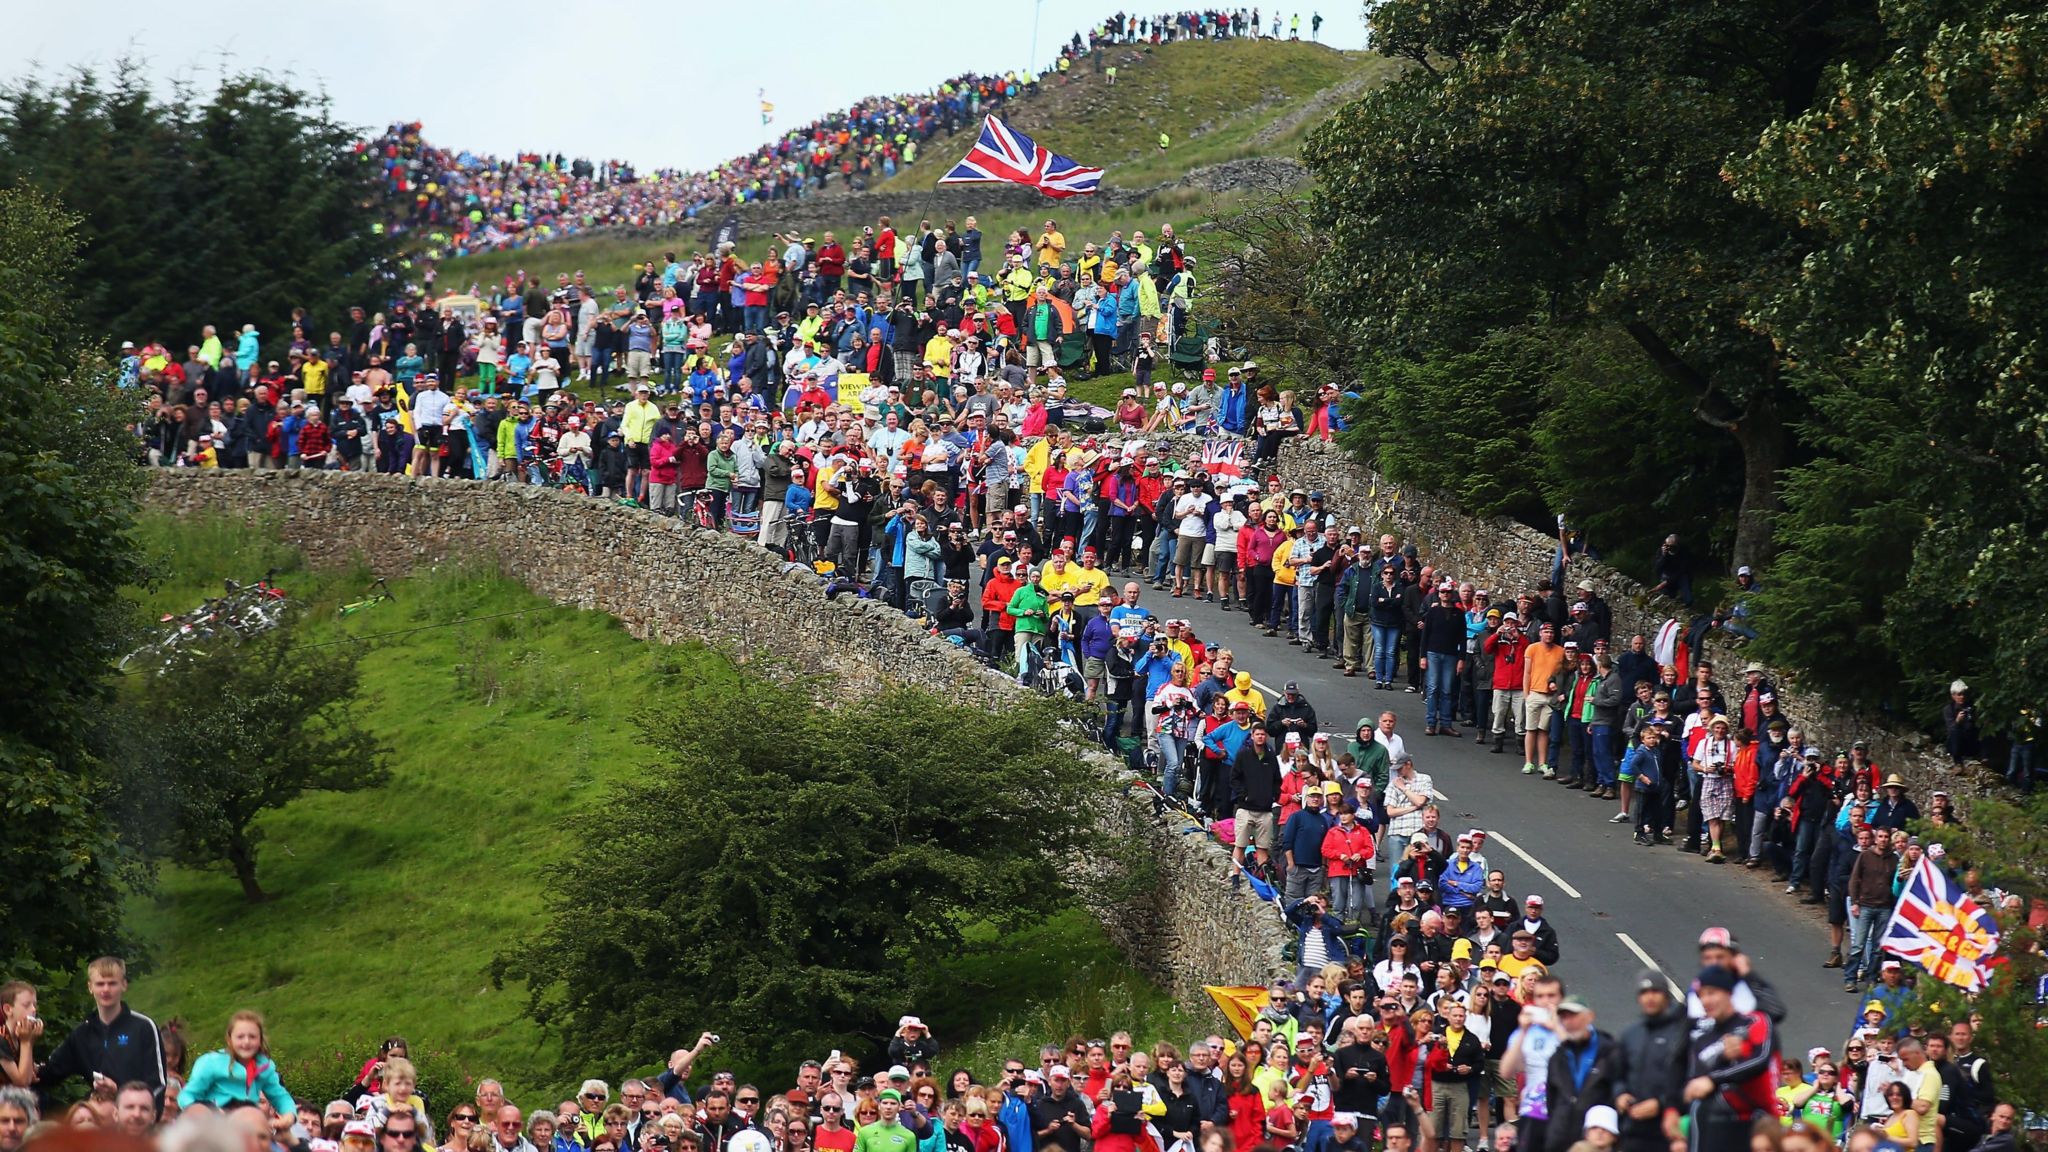 Spectators line the road side during the first stage of the 2014 Tour de France, a 190km stage between Leeds and Harrogate, on July 5, 2014 in Harrogate, England. 